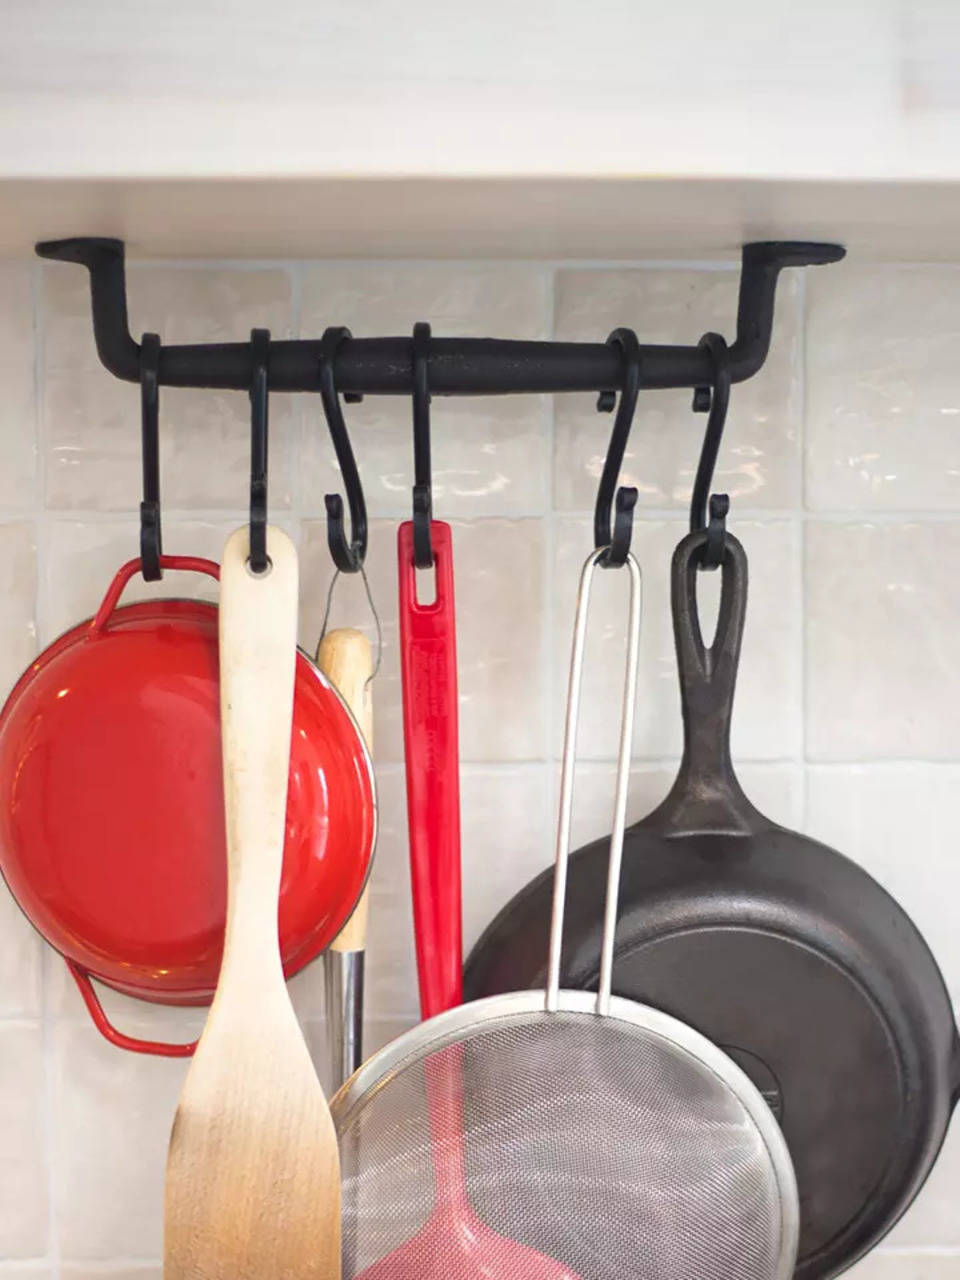 18 Commonly Kitchen Utensils In